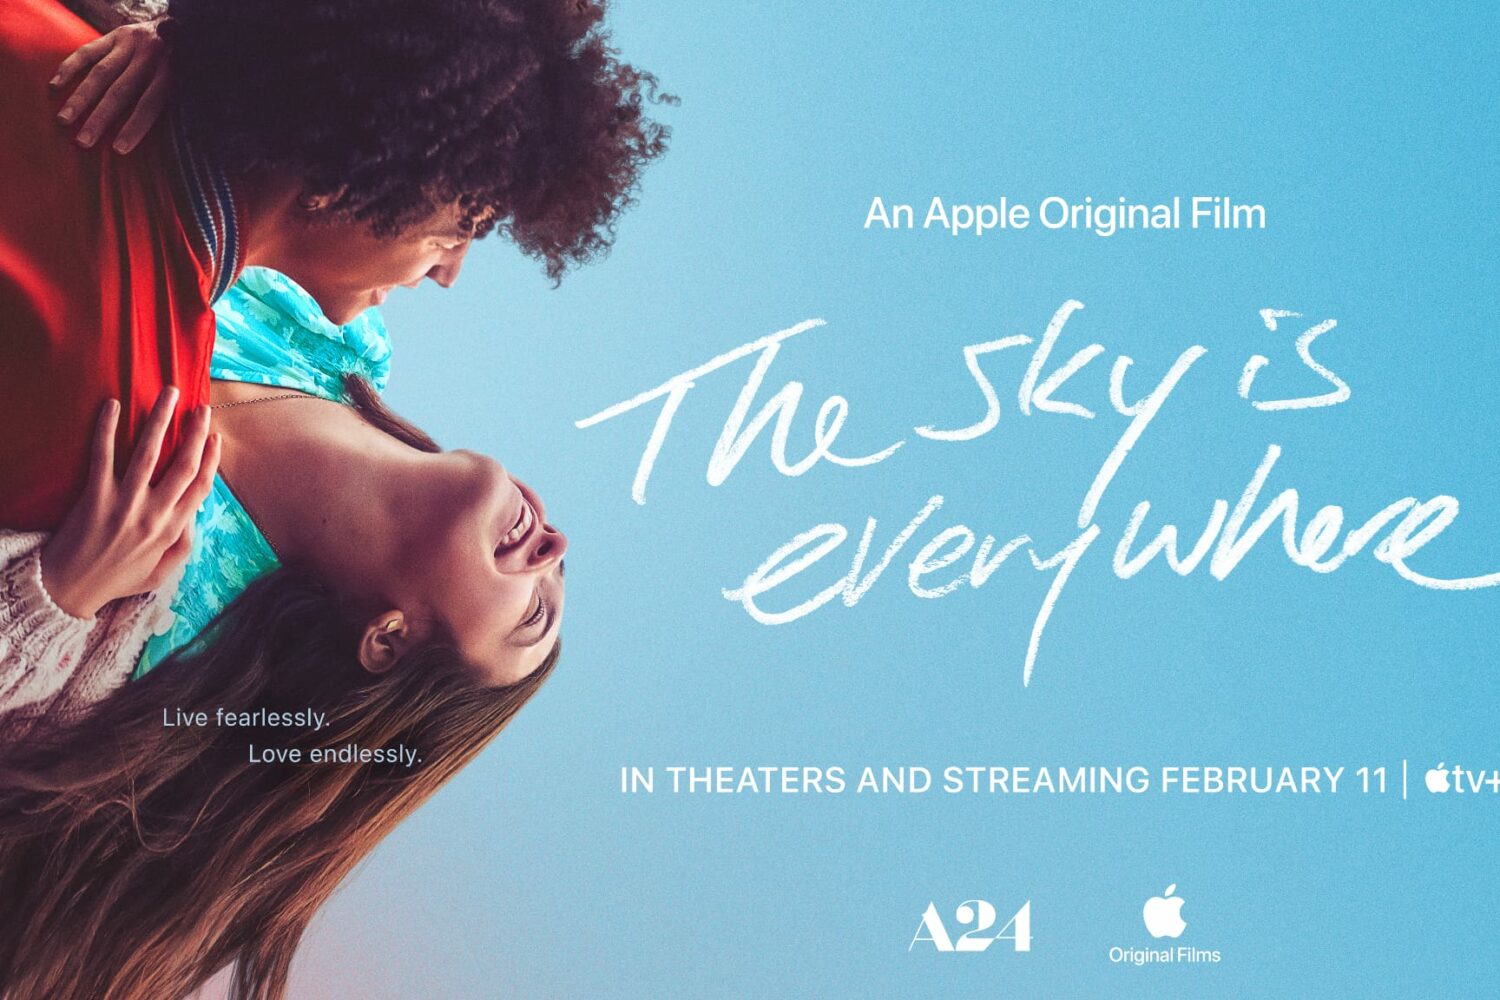 Poster artwork for “The Sky is Everywhere,” an Apple TV+ film adaptation of the young adult novel of the same name by Sandy Nelson